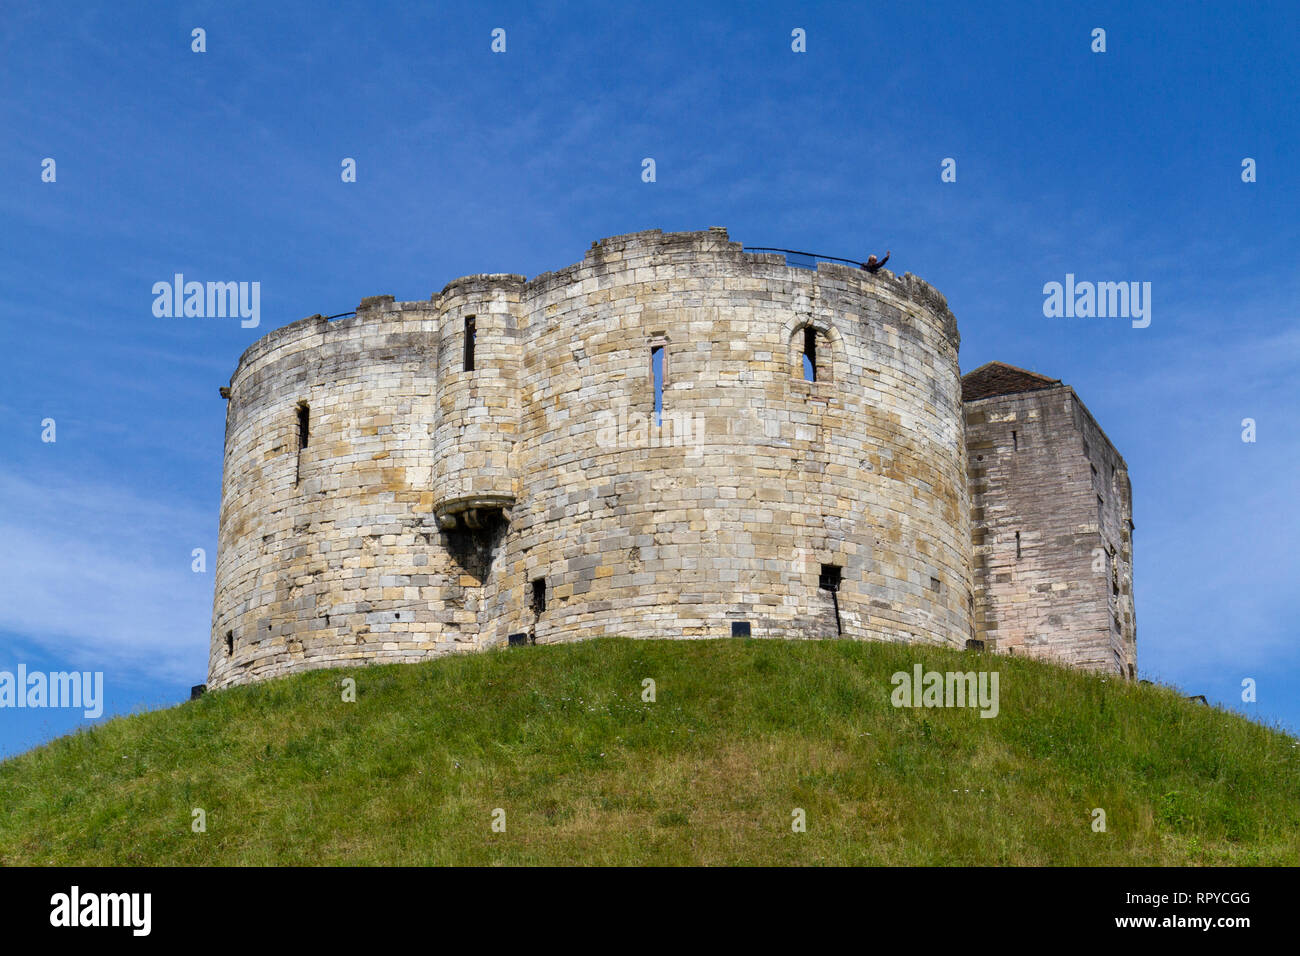 Clifford's Tower, City of York, Yorkshire, UK. Stock Photo